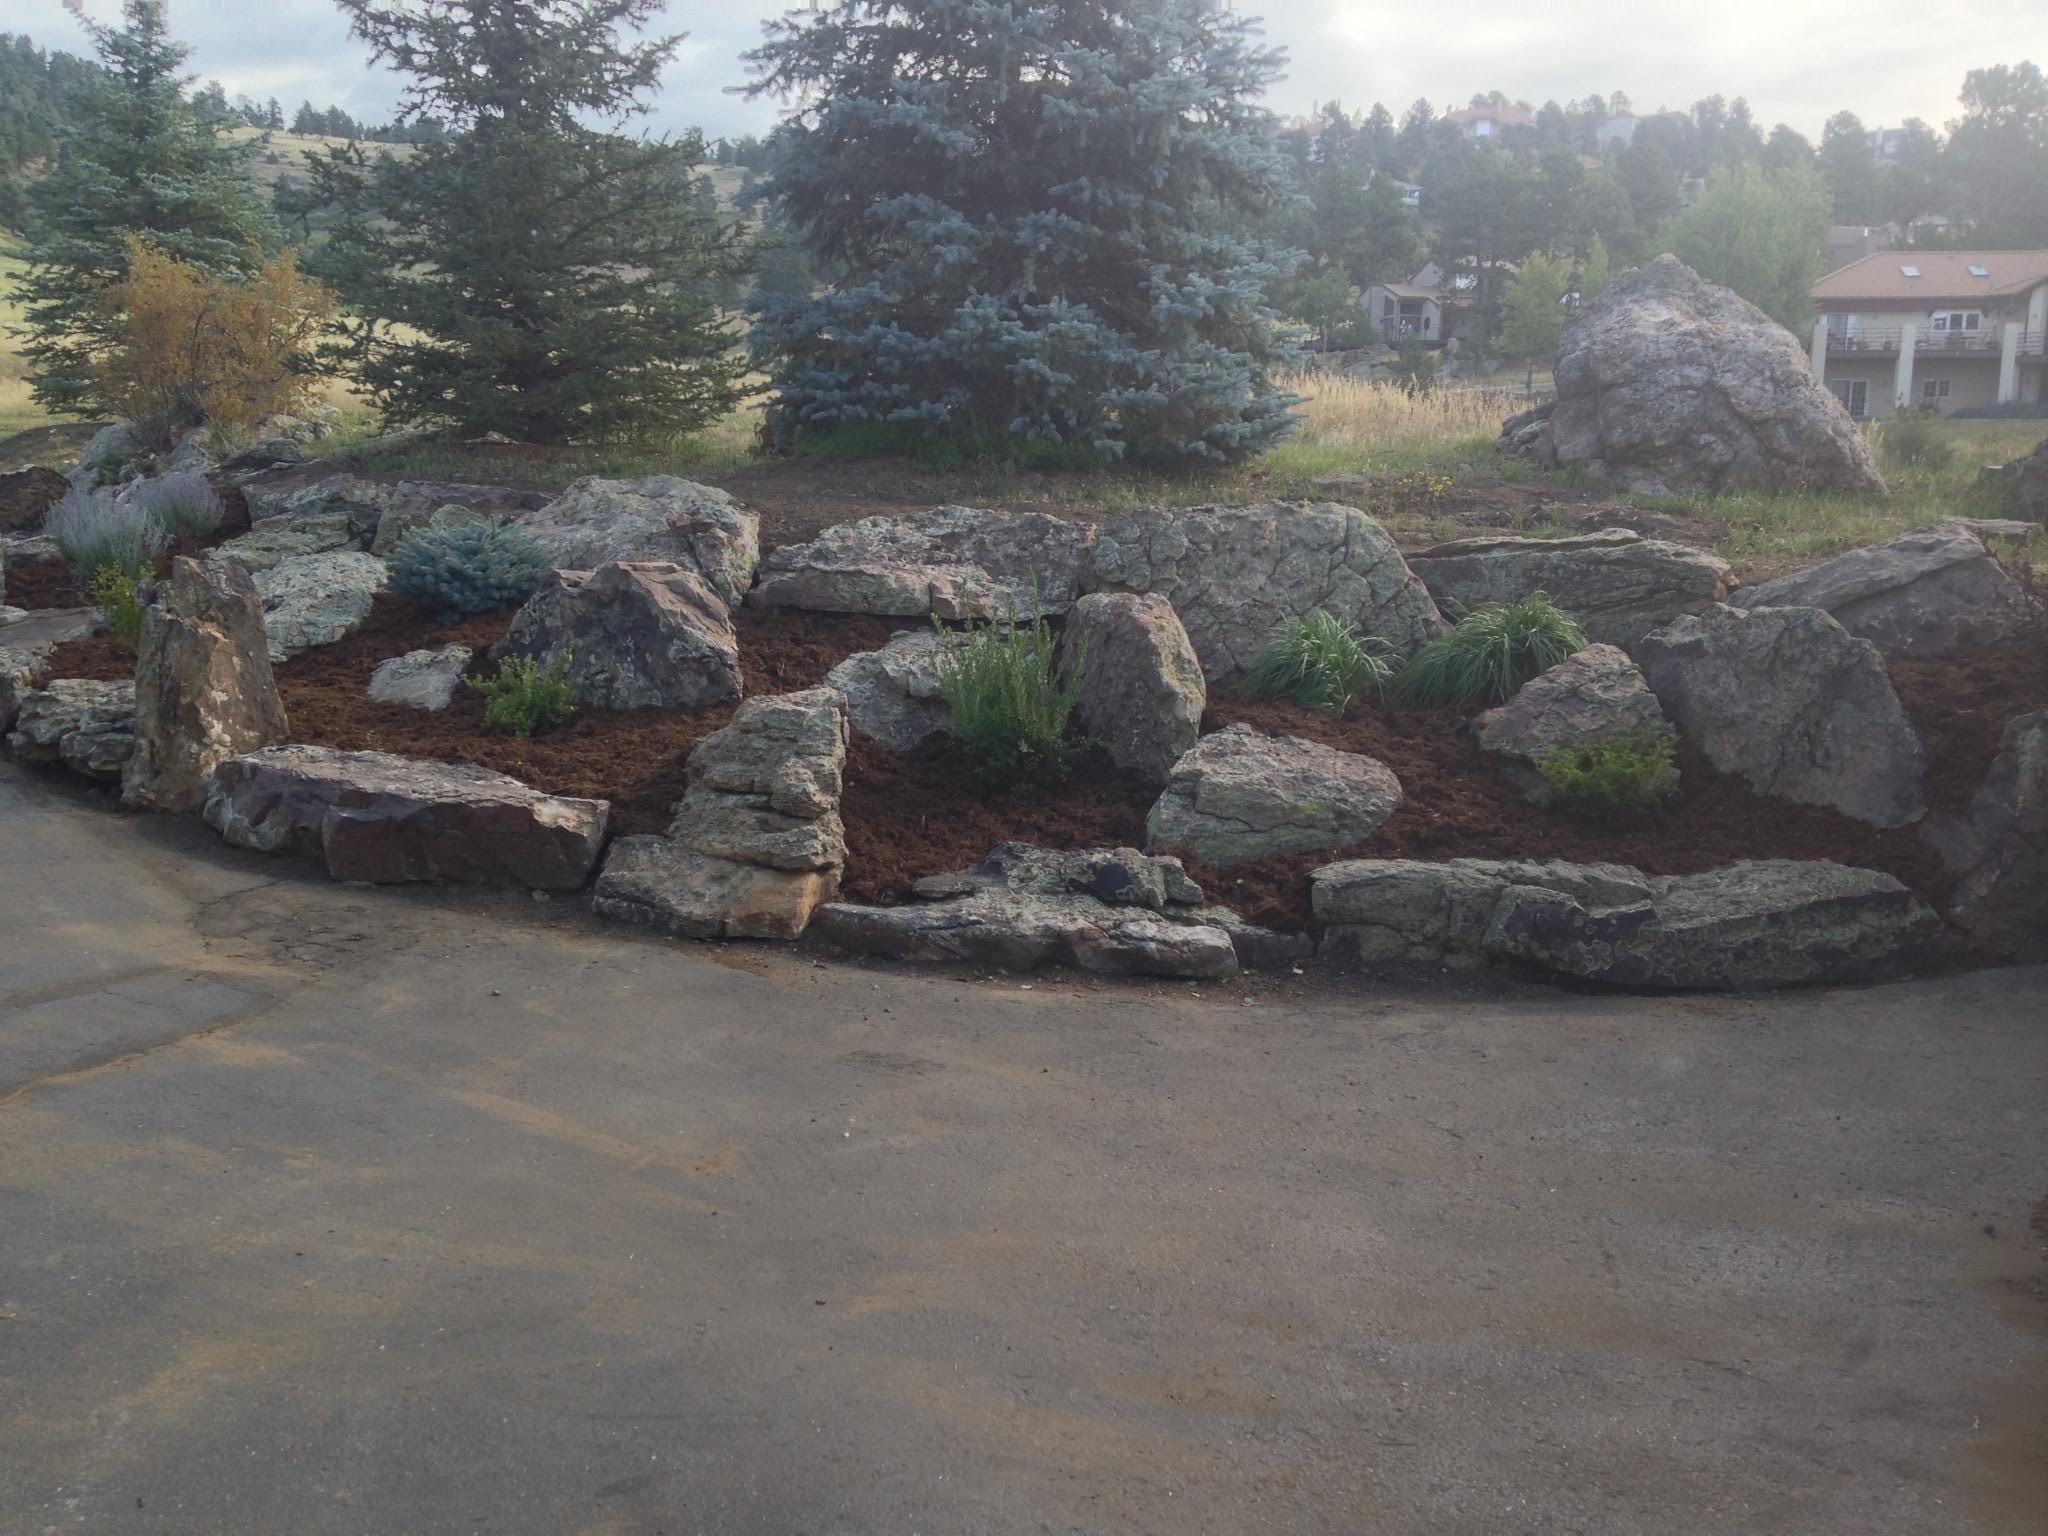 Stones set throughout area next to driveway, with bushes